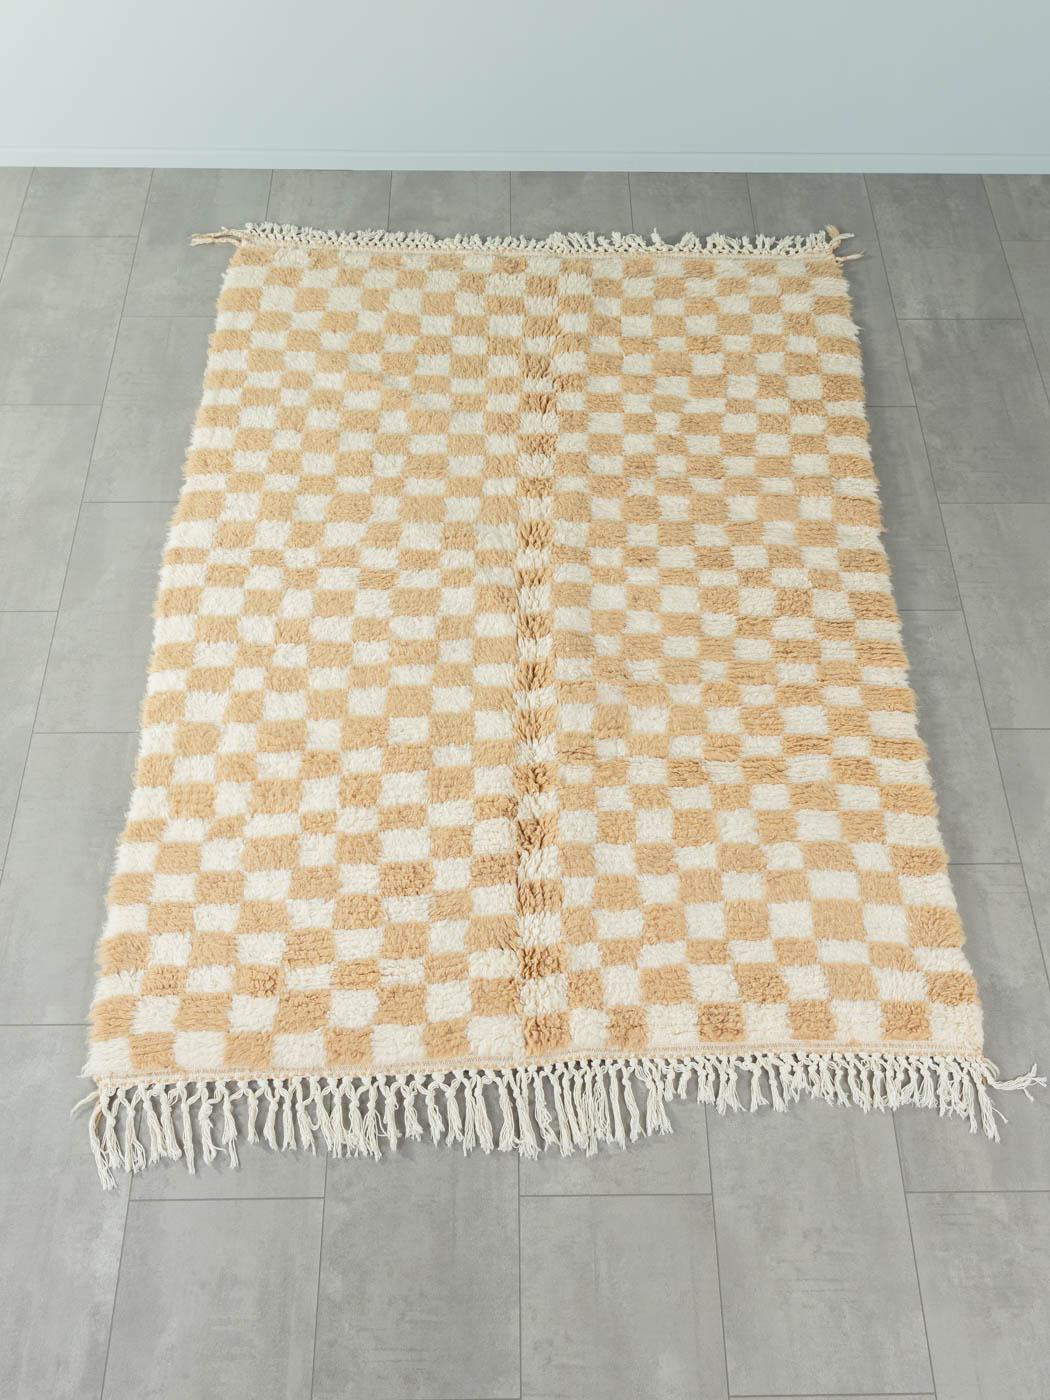 Sand Check is a contemporary 100% wool rug – thick and soft, comfortable underfoot. Our Berber rugs are handwoven and handknotted by Amazigh women in the Atlas Mountains. These communities have been crafting rugs for thousands of years. One knot at